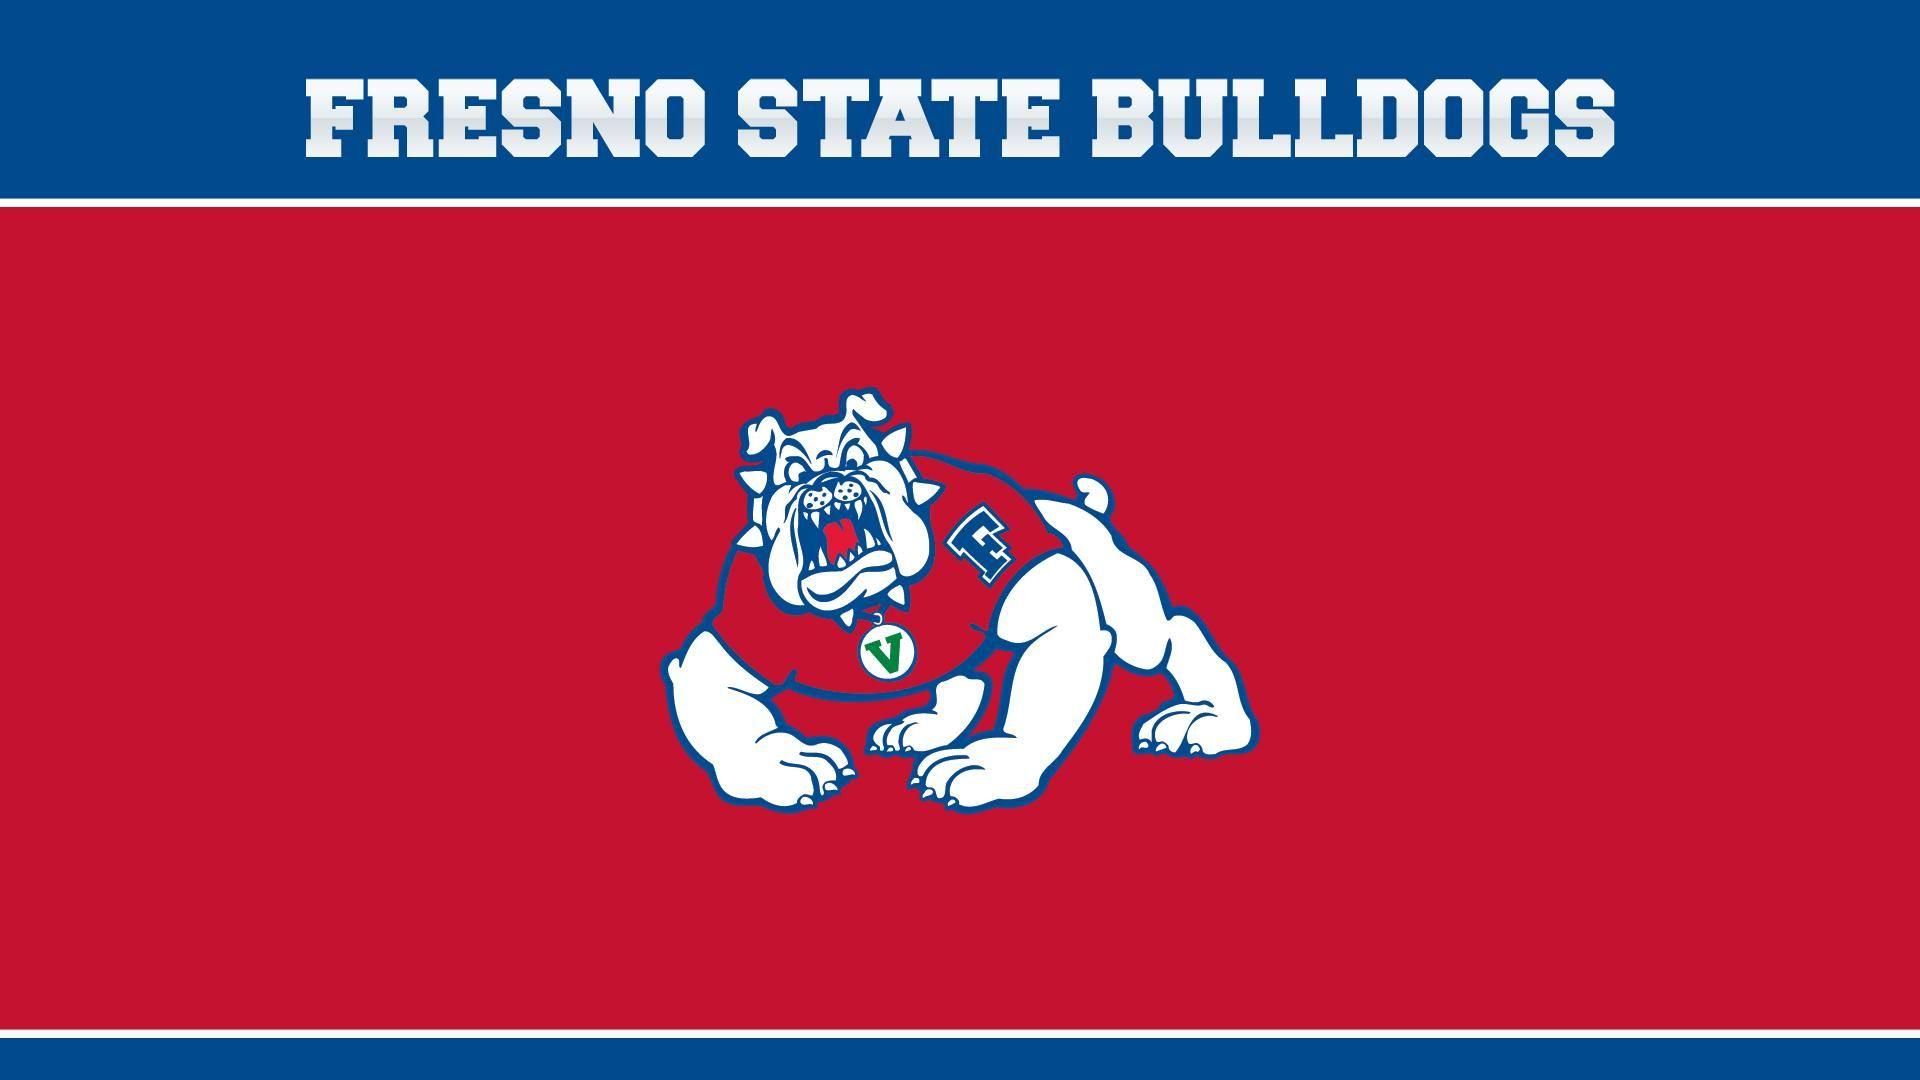 Cheap Fresno State Bulldogs Tickets & Events Schedule 2018